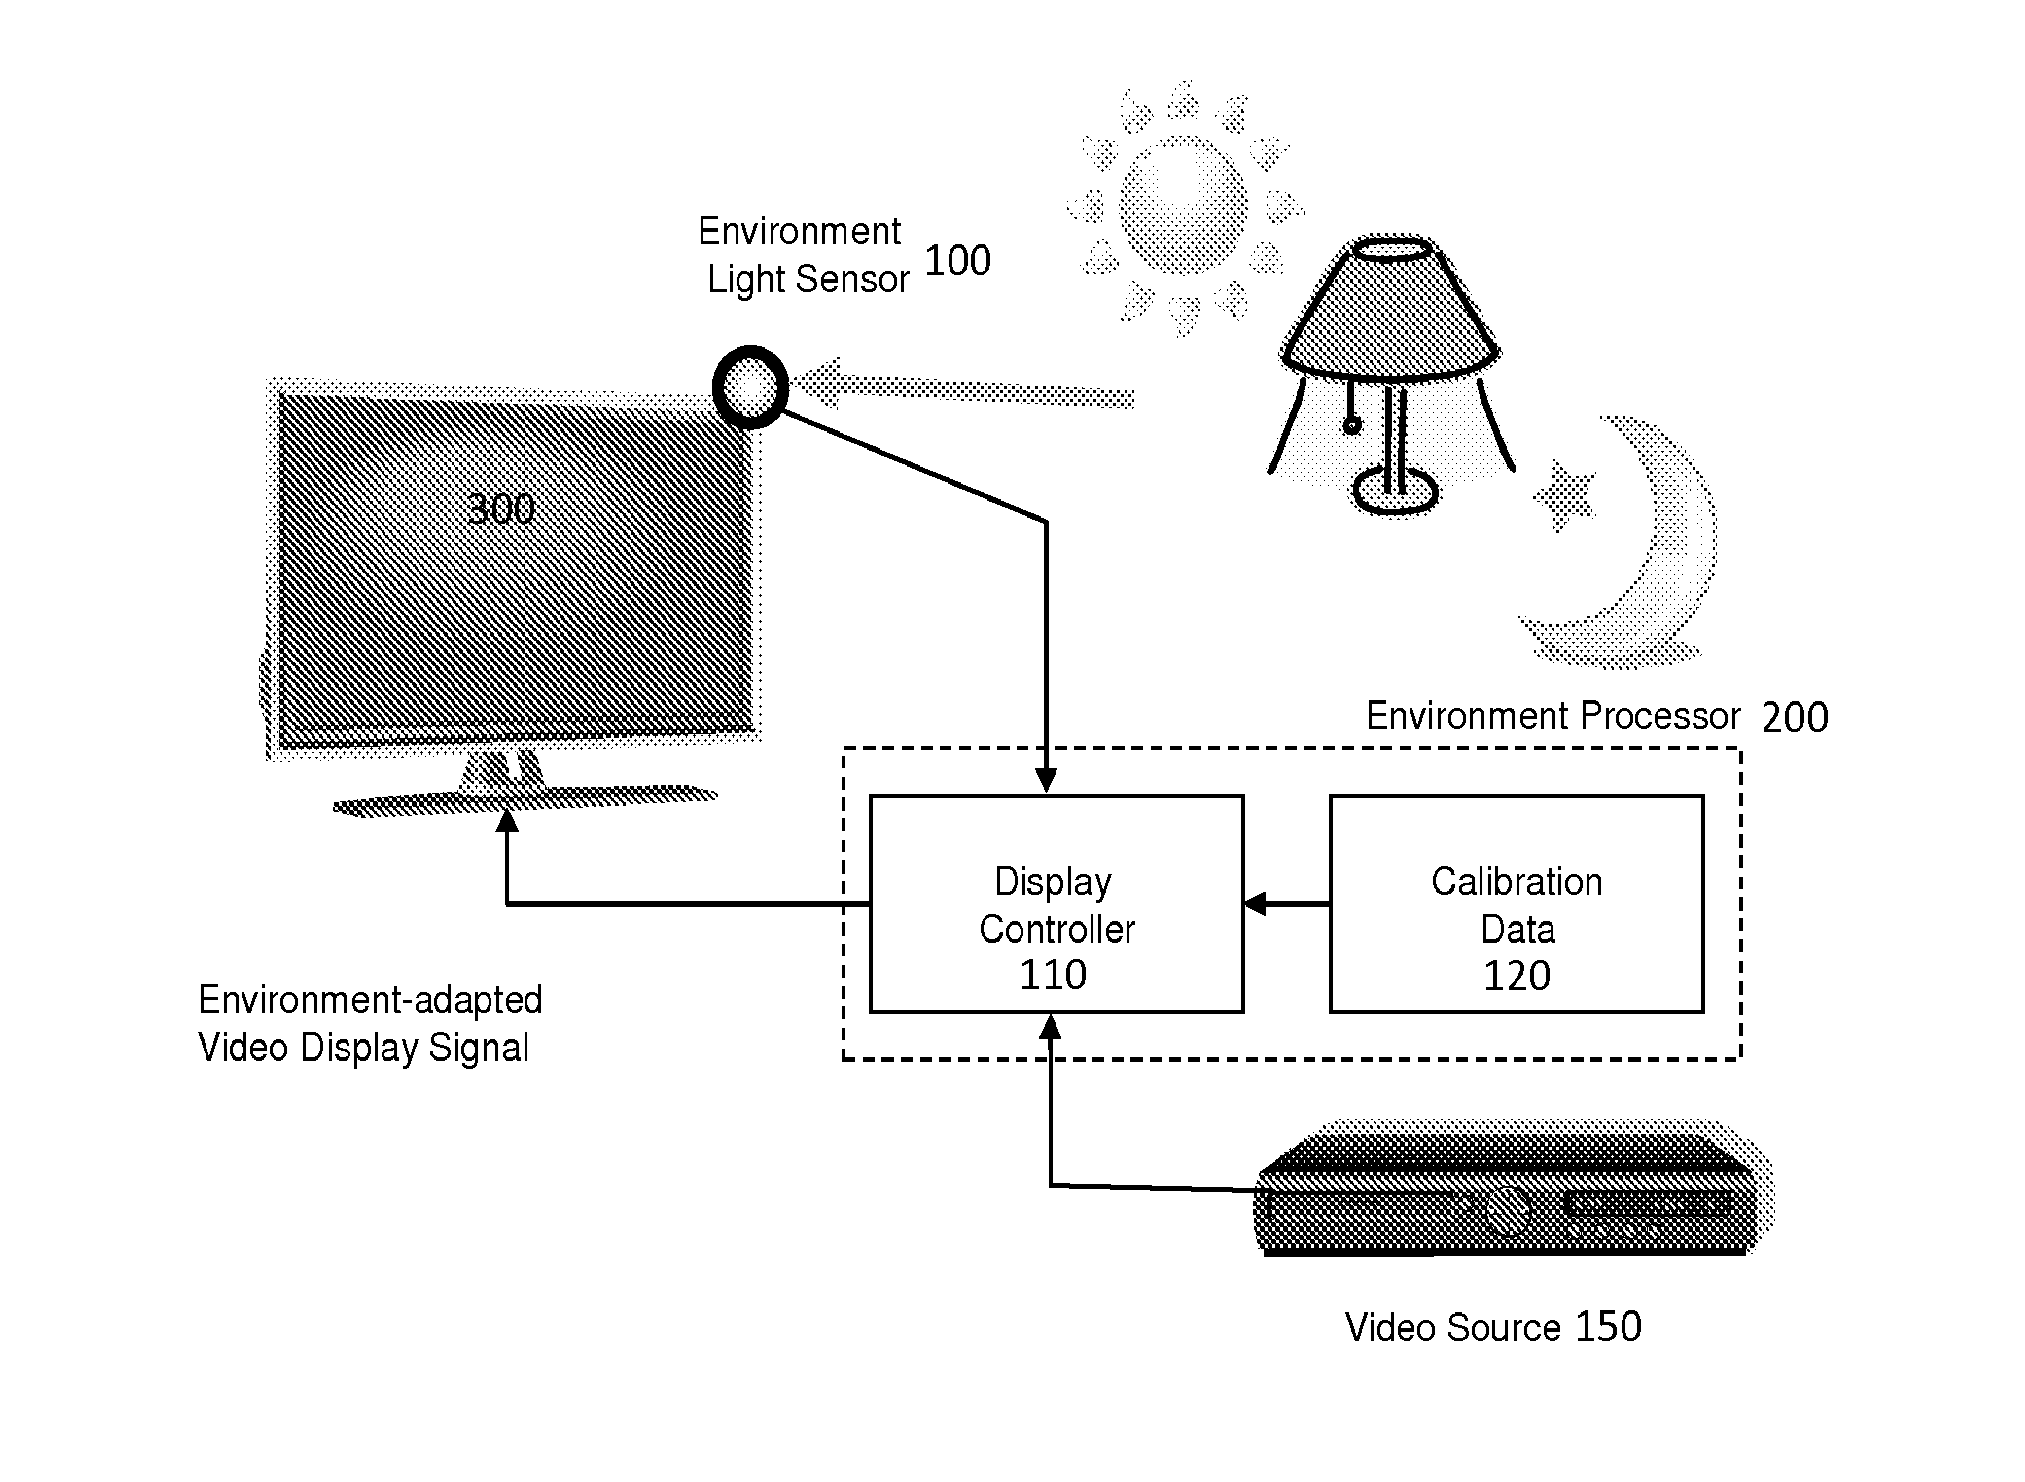 System and method for environmental adaptation of display characteristics